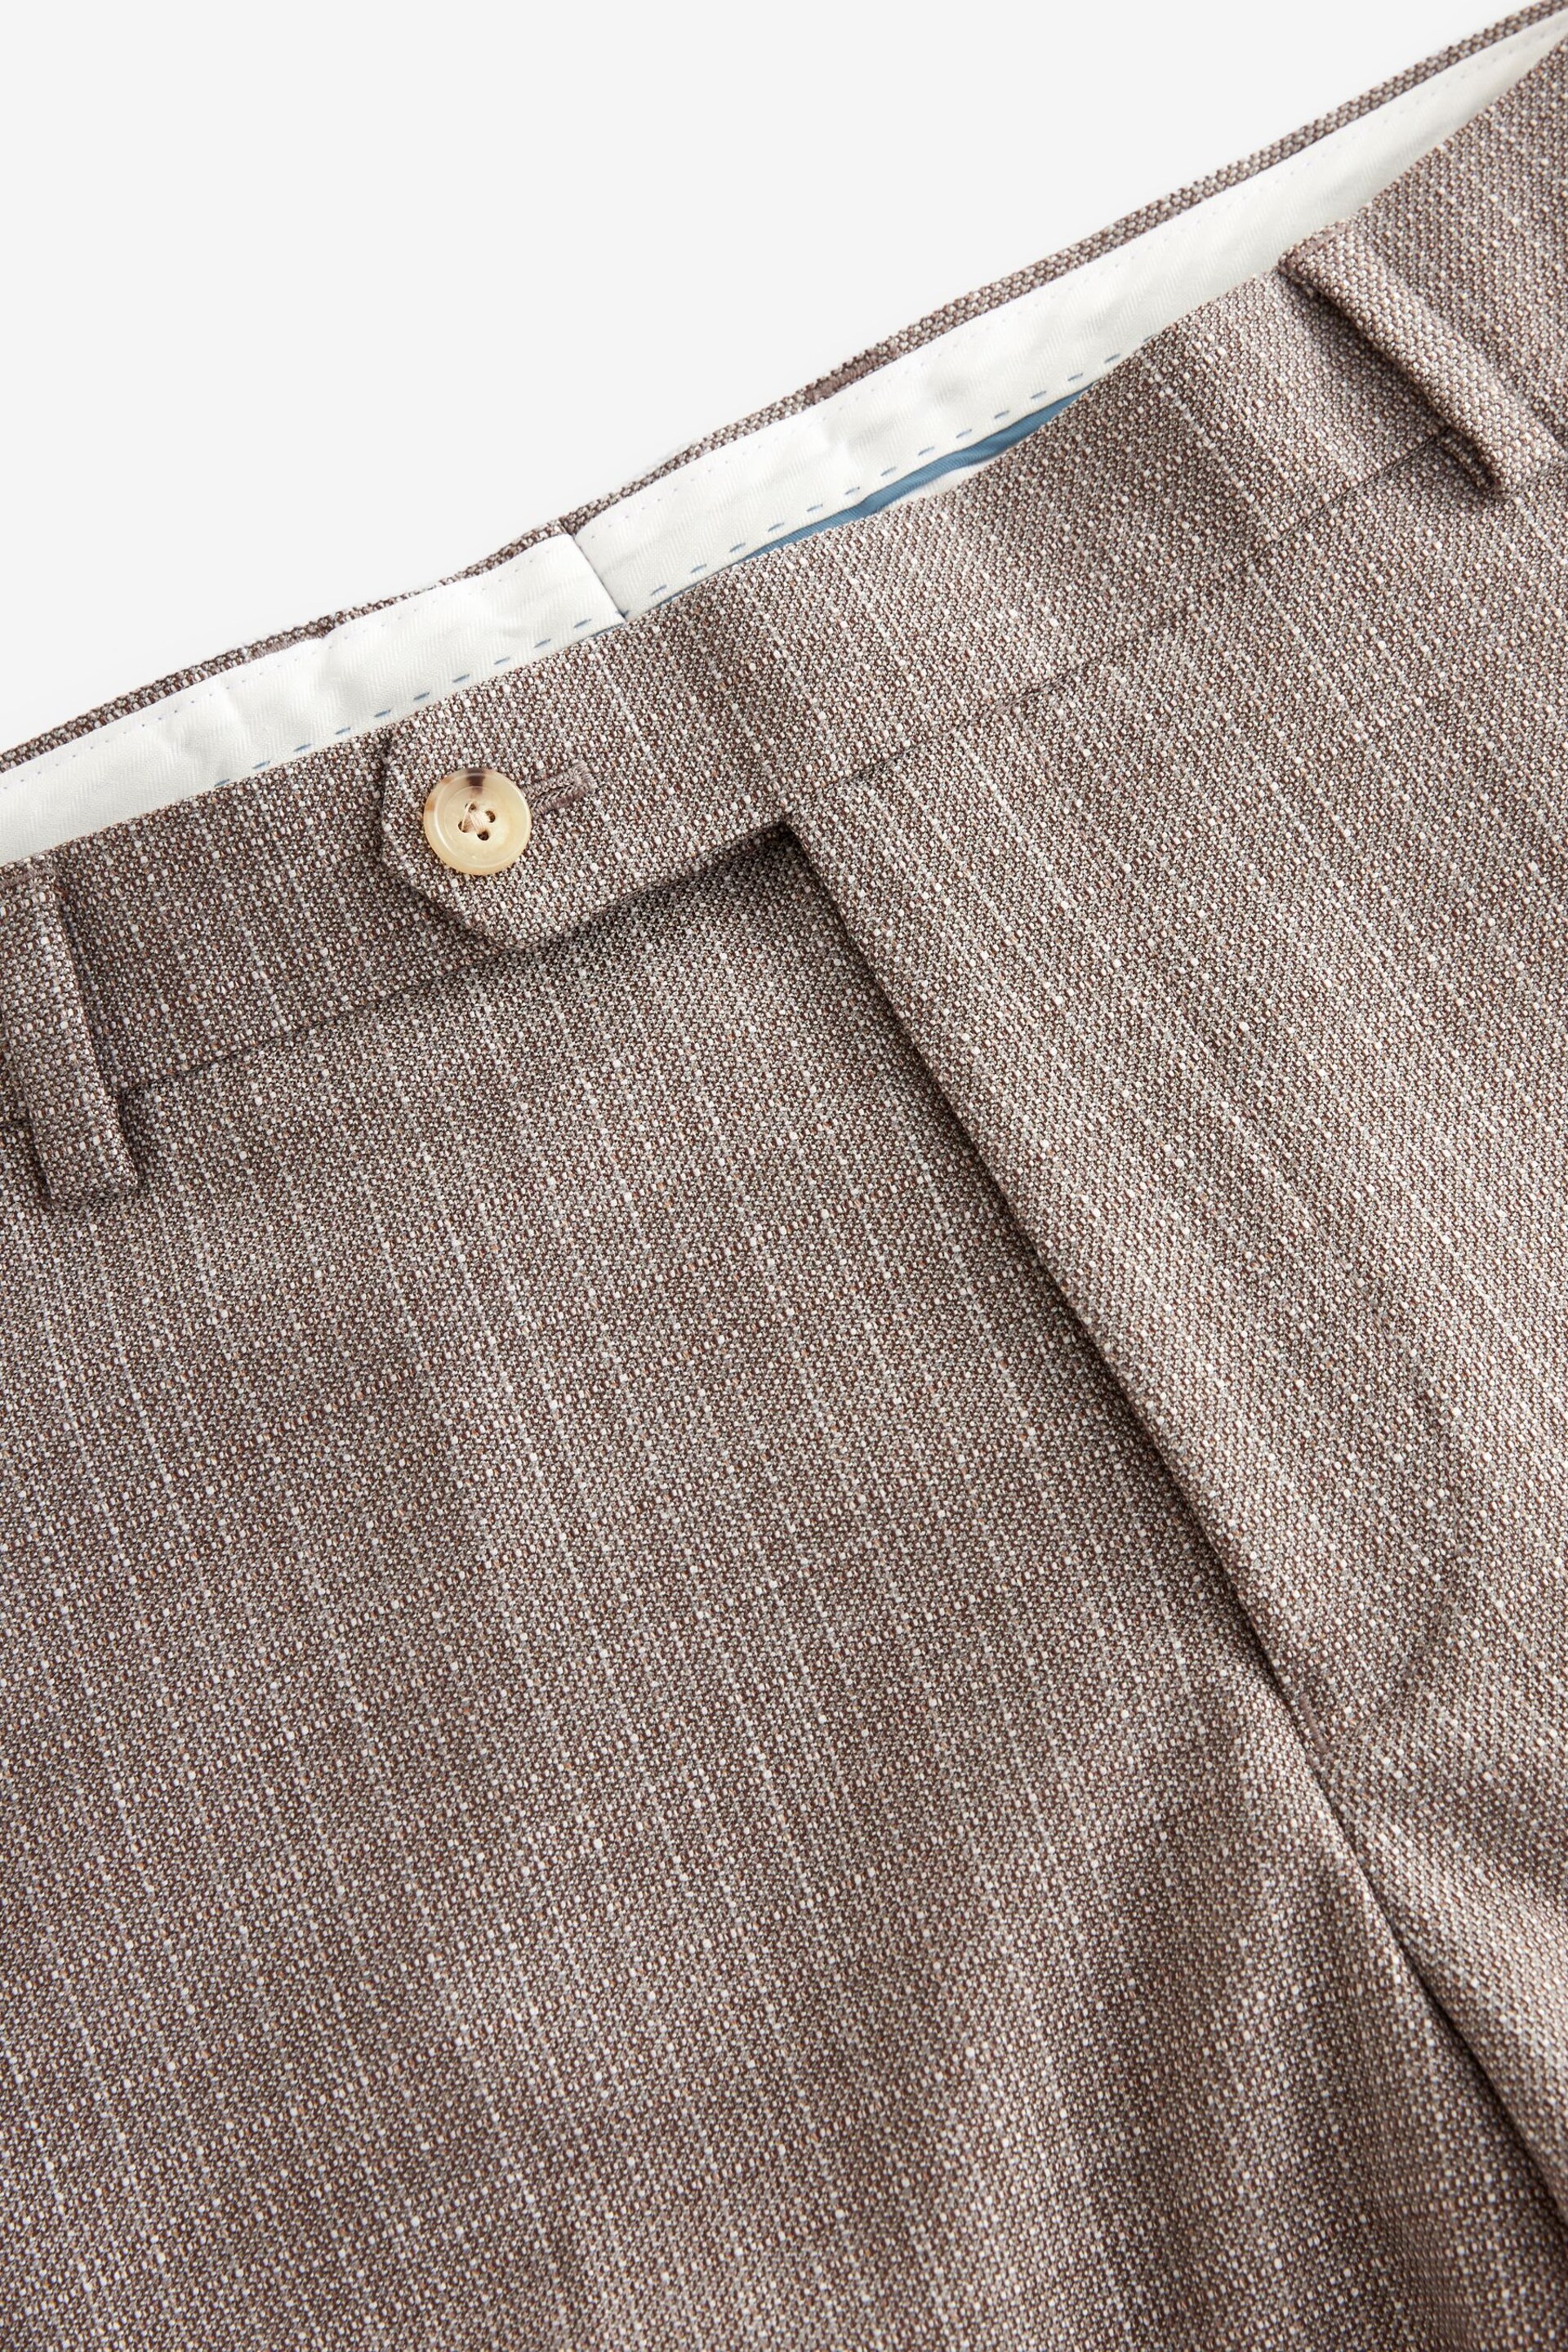 Neutral Slim Fit Textured Suit Trousers - Image 7 of 9